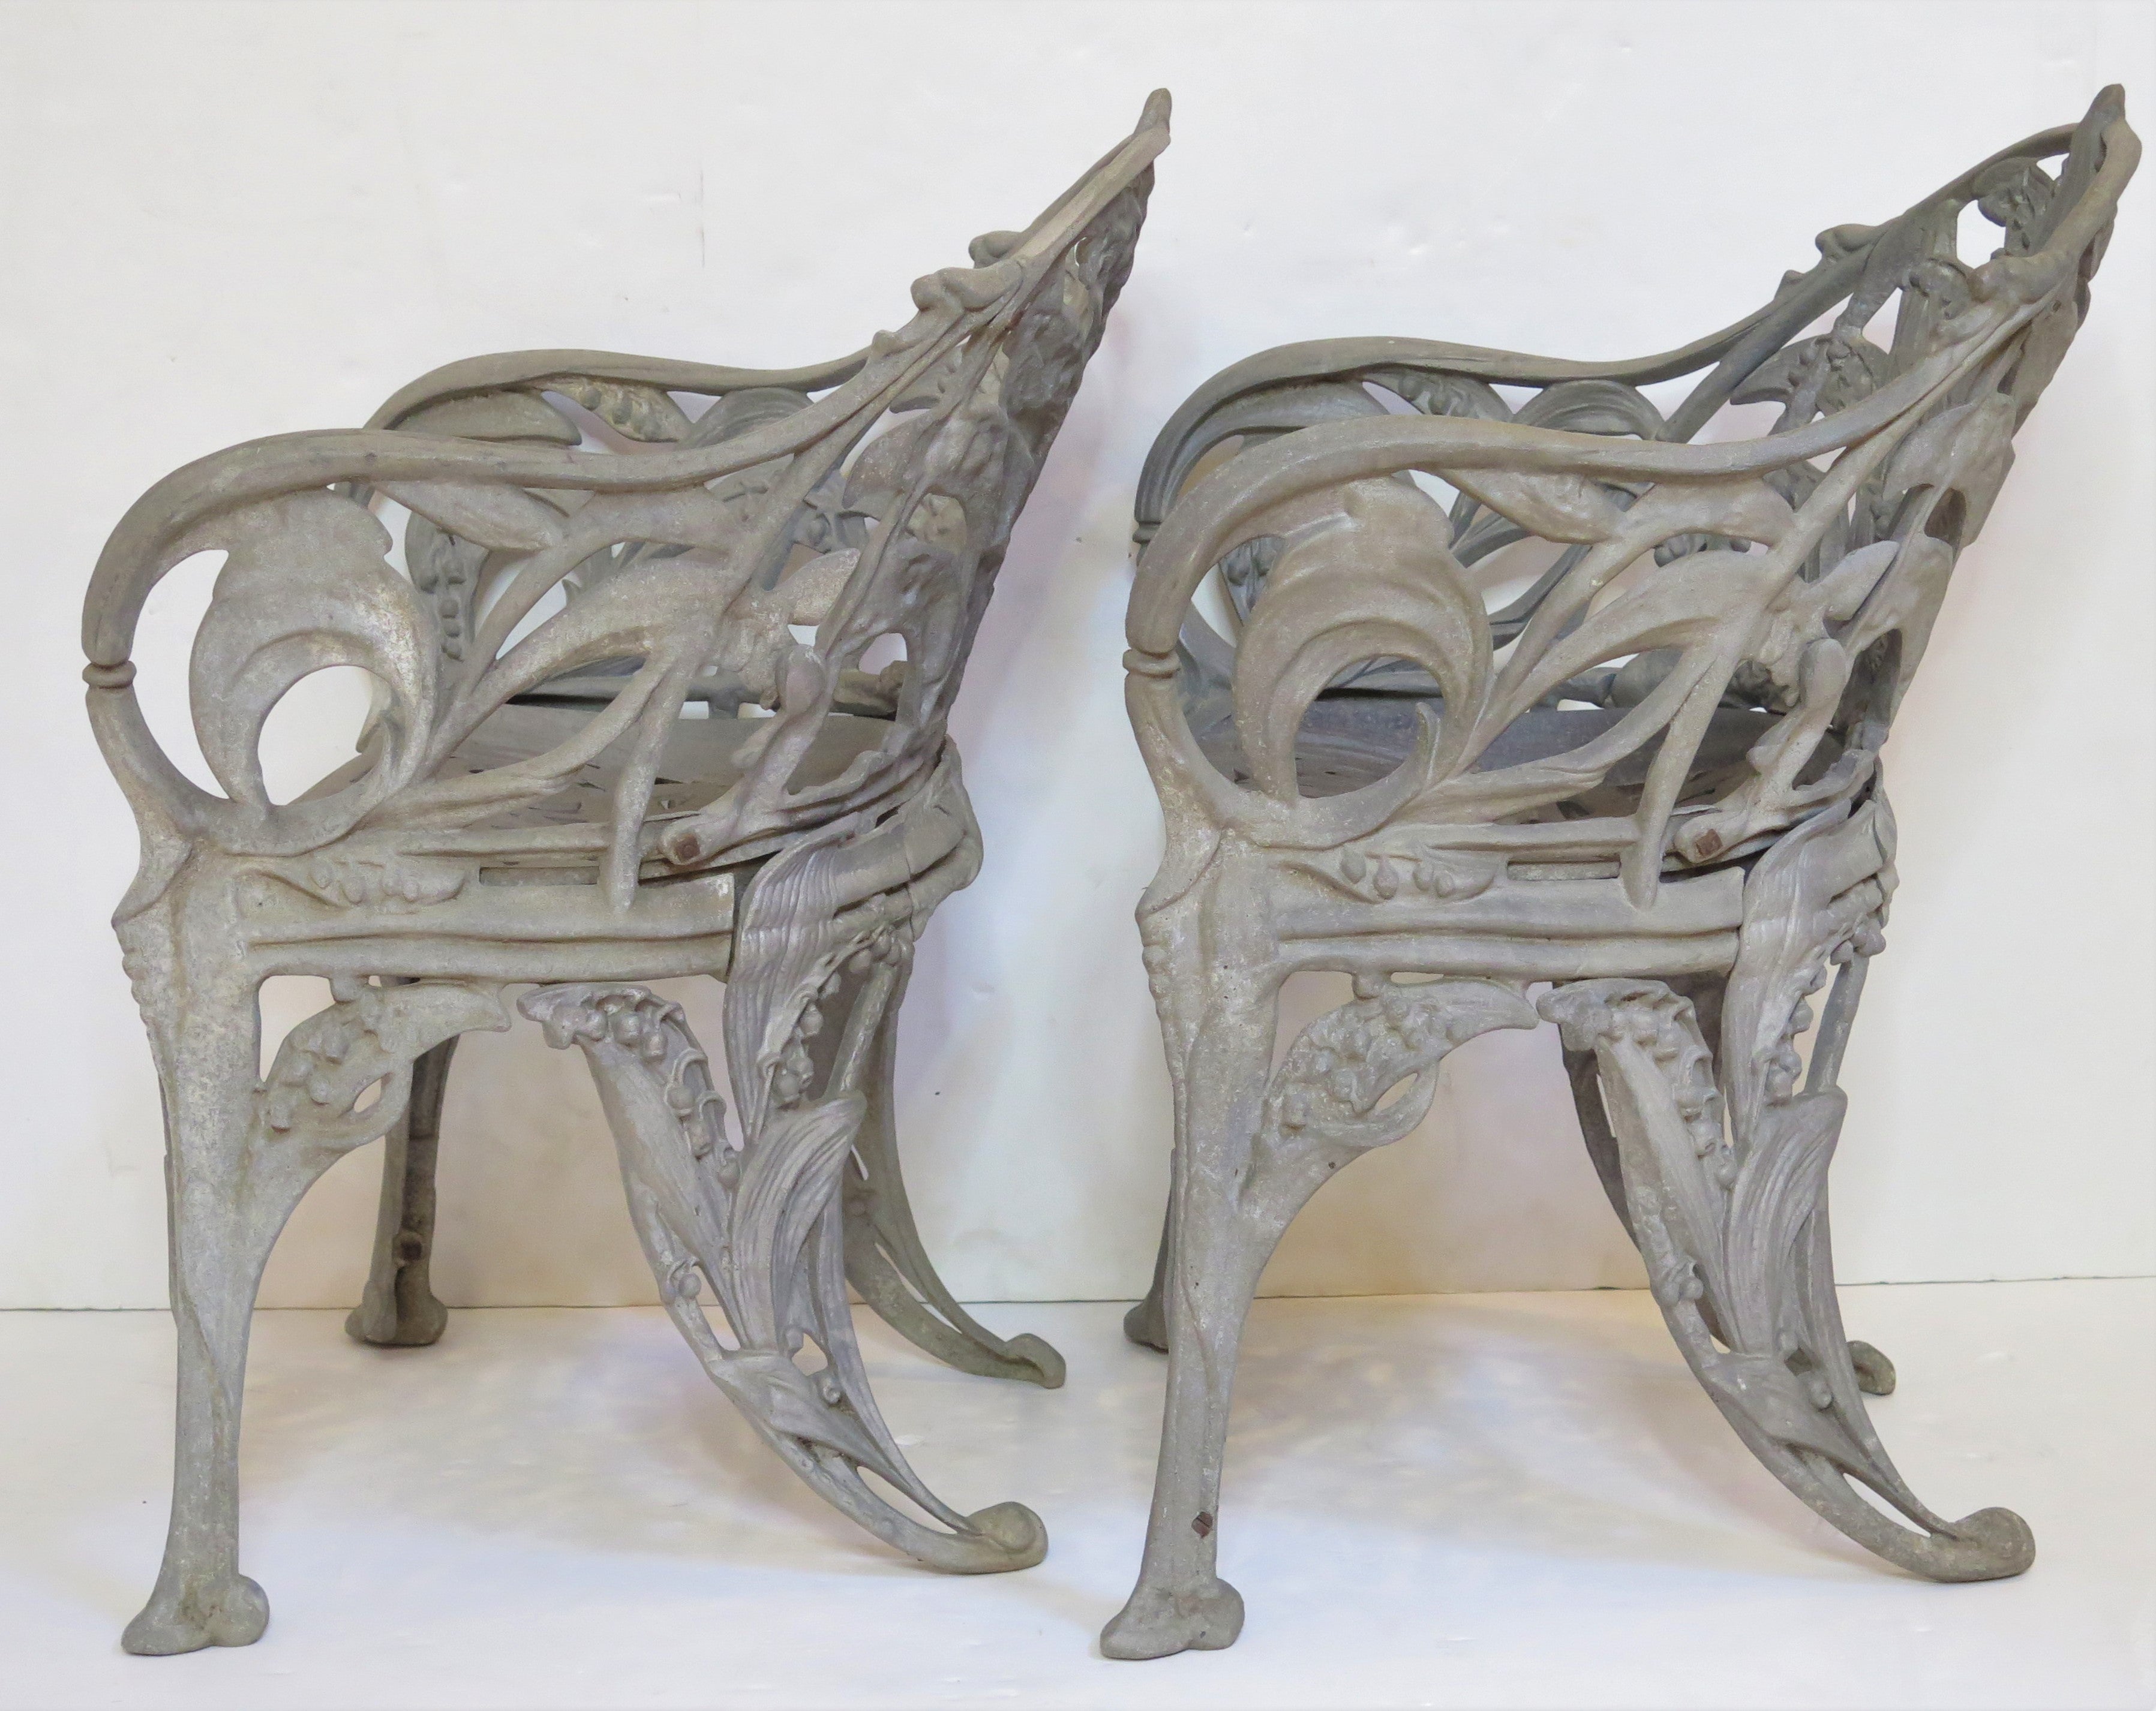 Pair of Late Victorian Cast Aluminum Lilly of the Valley Chairs